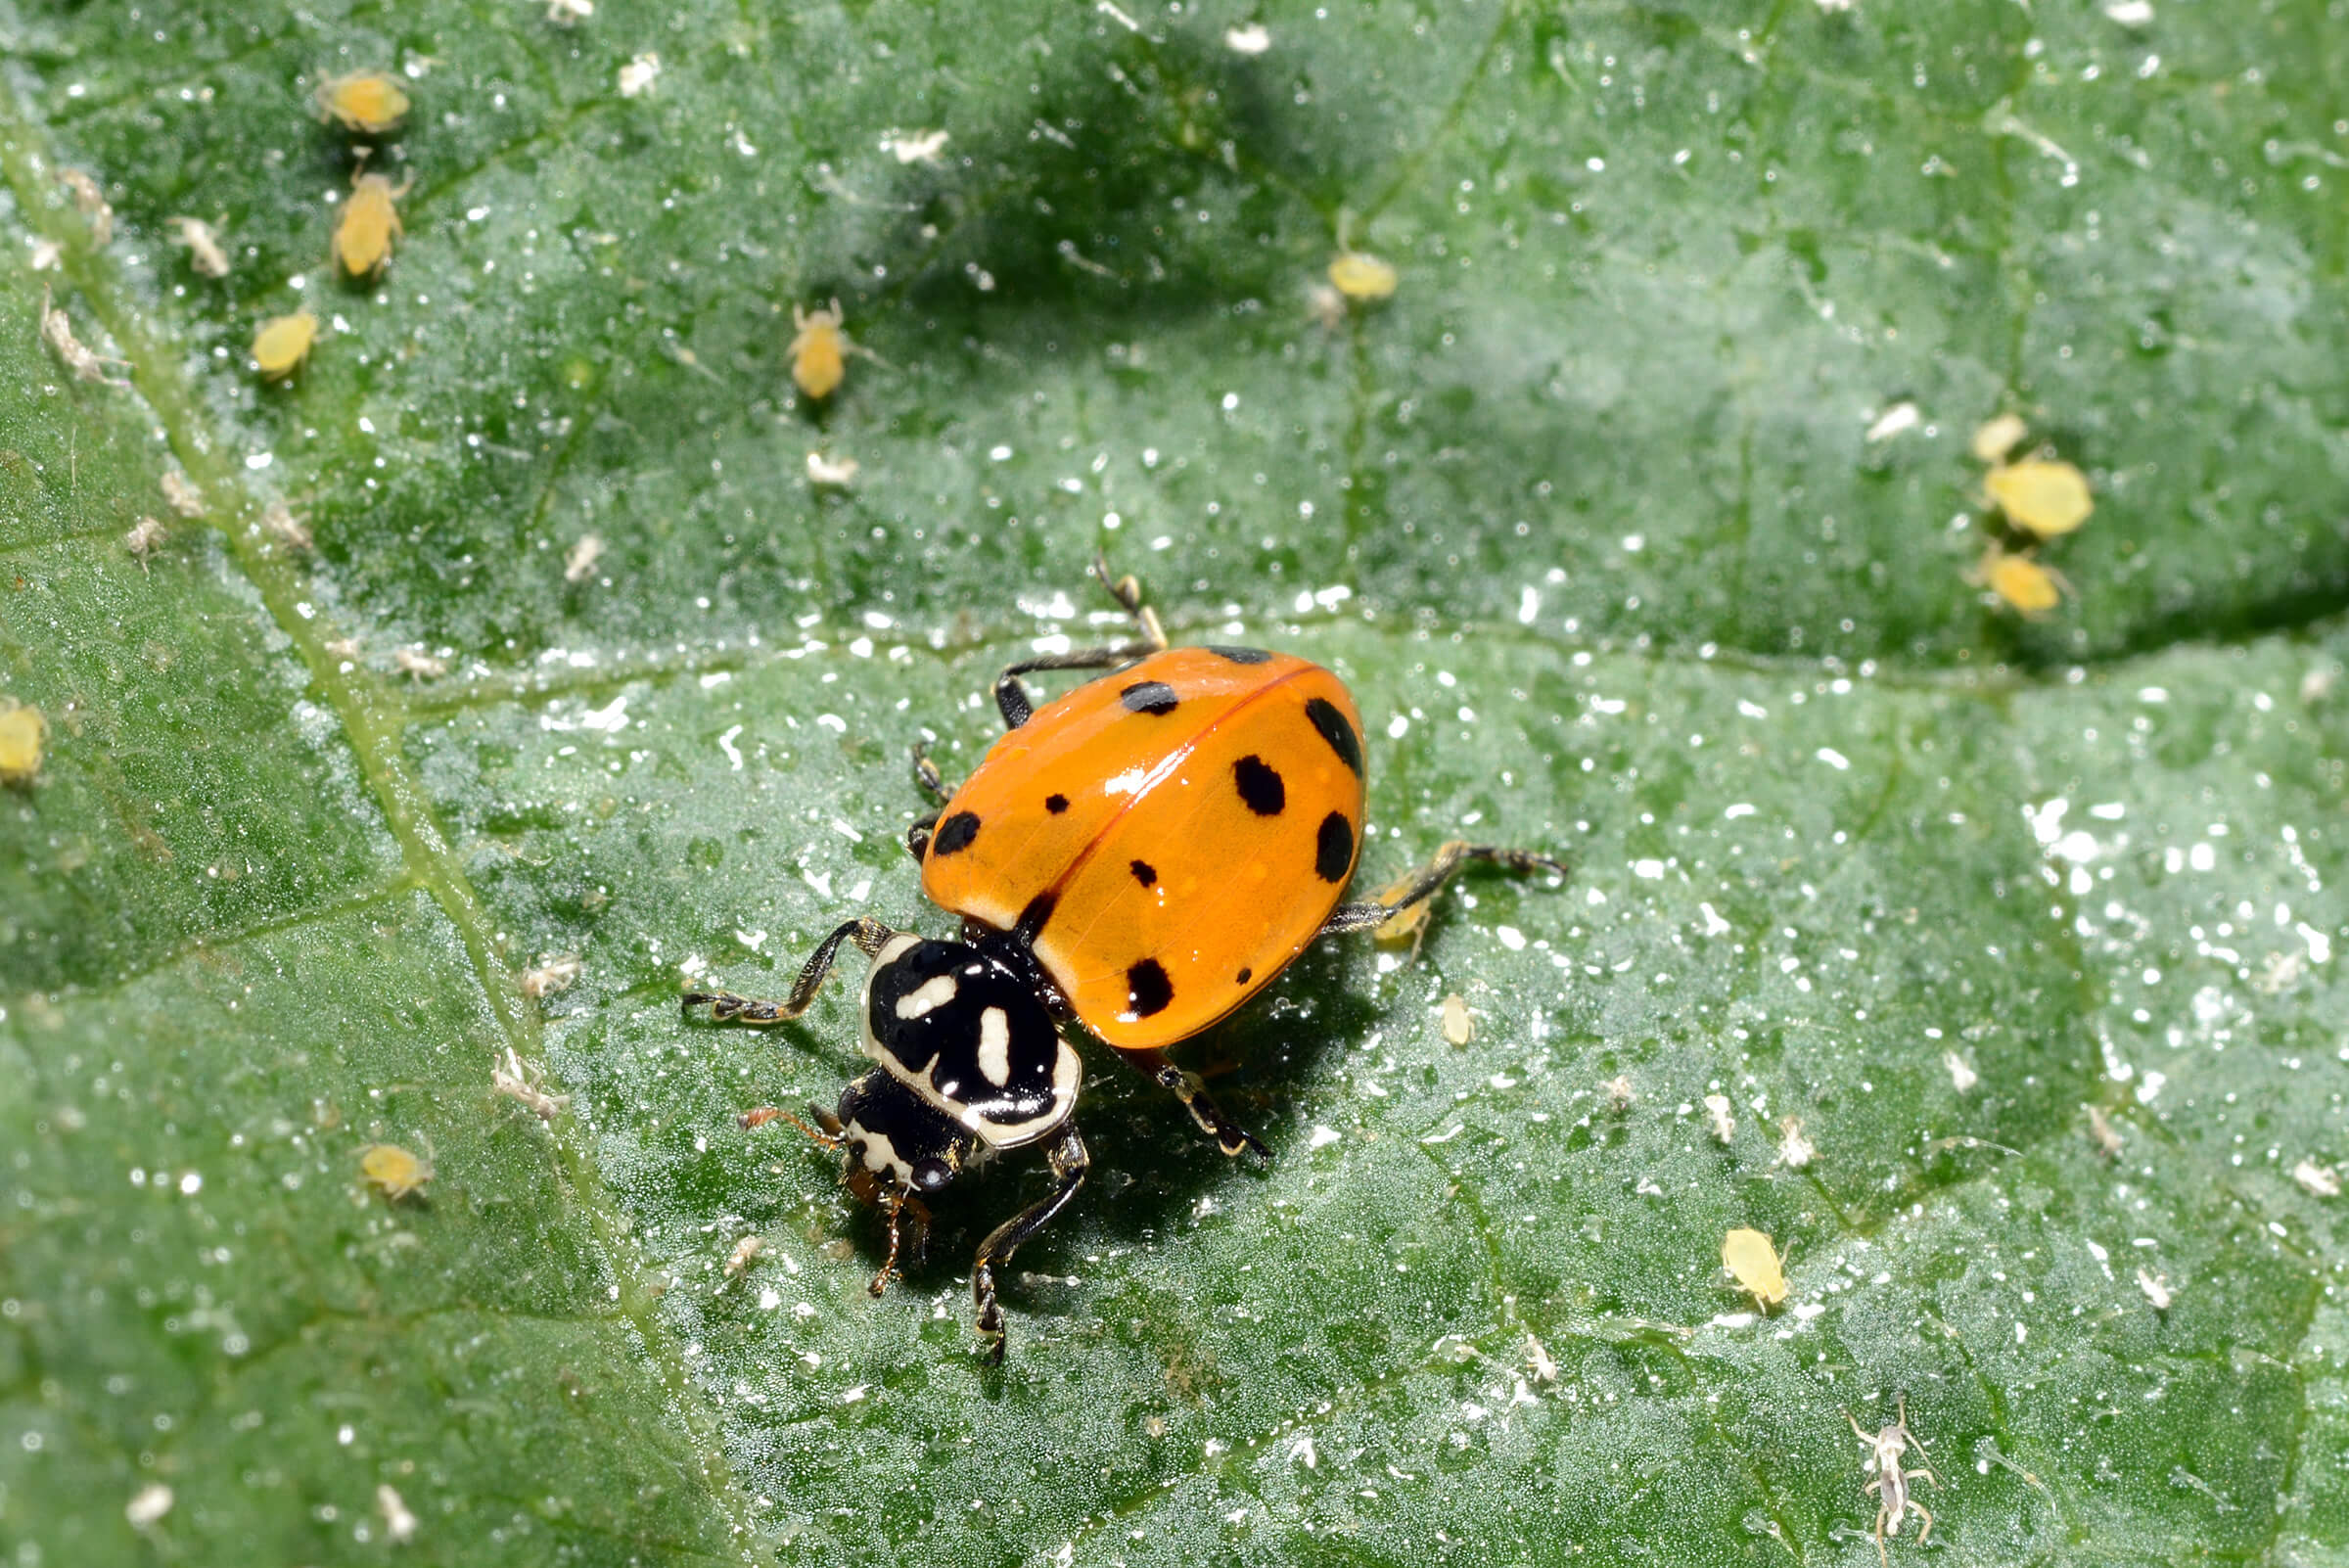 Predators like the lady beetle are important components of vegetable production systems. Purdue researcher Laura Ingwell is working to find the right size insect exclusion screen to keep pests out but allow predators in. (Photo by John Obermeyer)